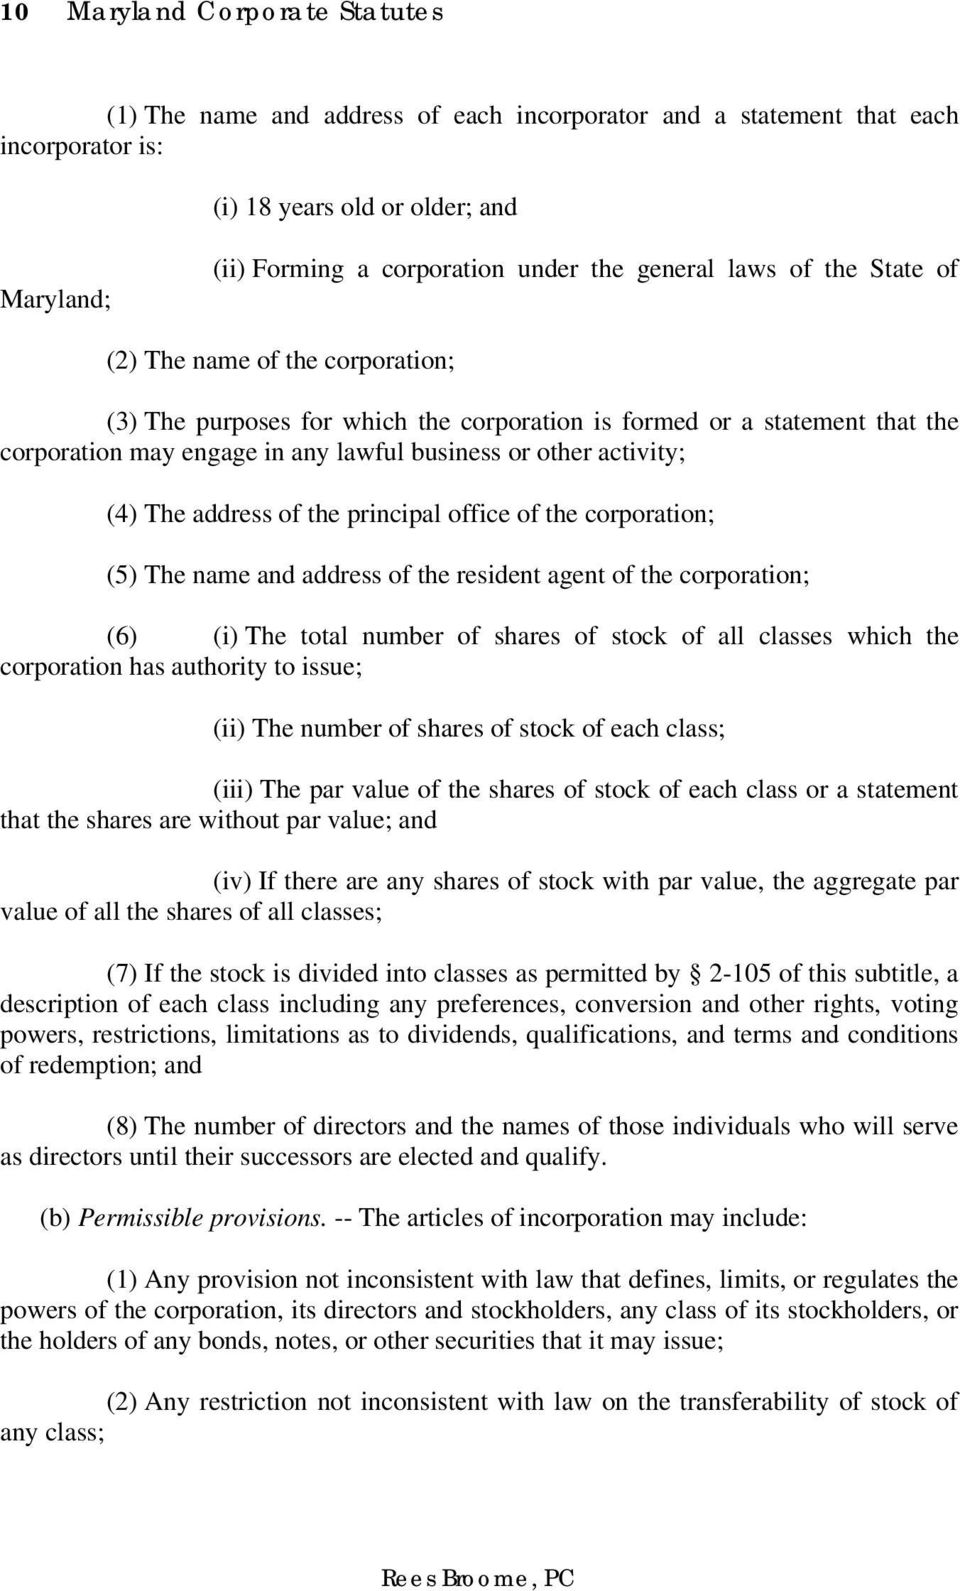 activity; (4) The address of the principal office of the corporation; (5) The name and address of the resident agent of the corporation; (6) (i) The total number of shares of stock of all classes